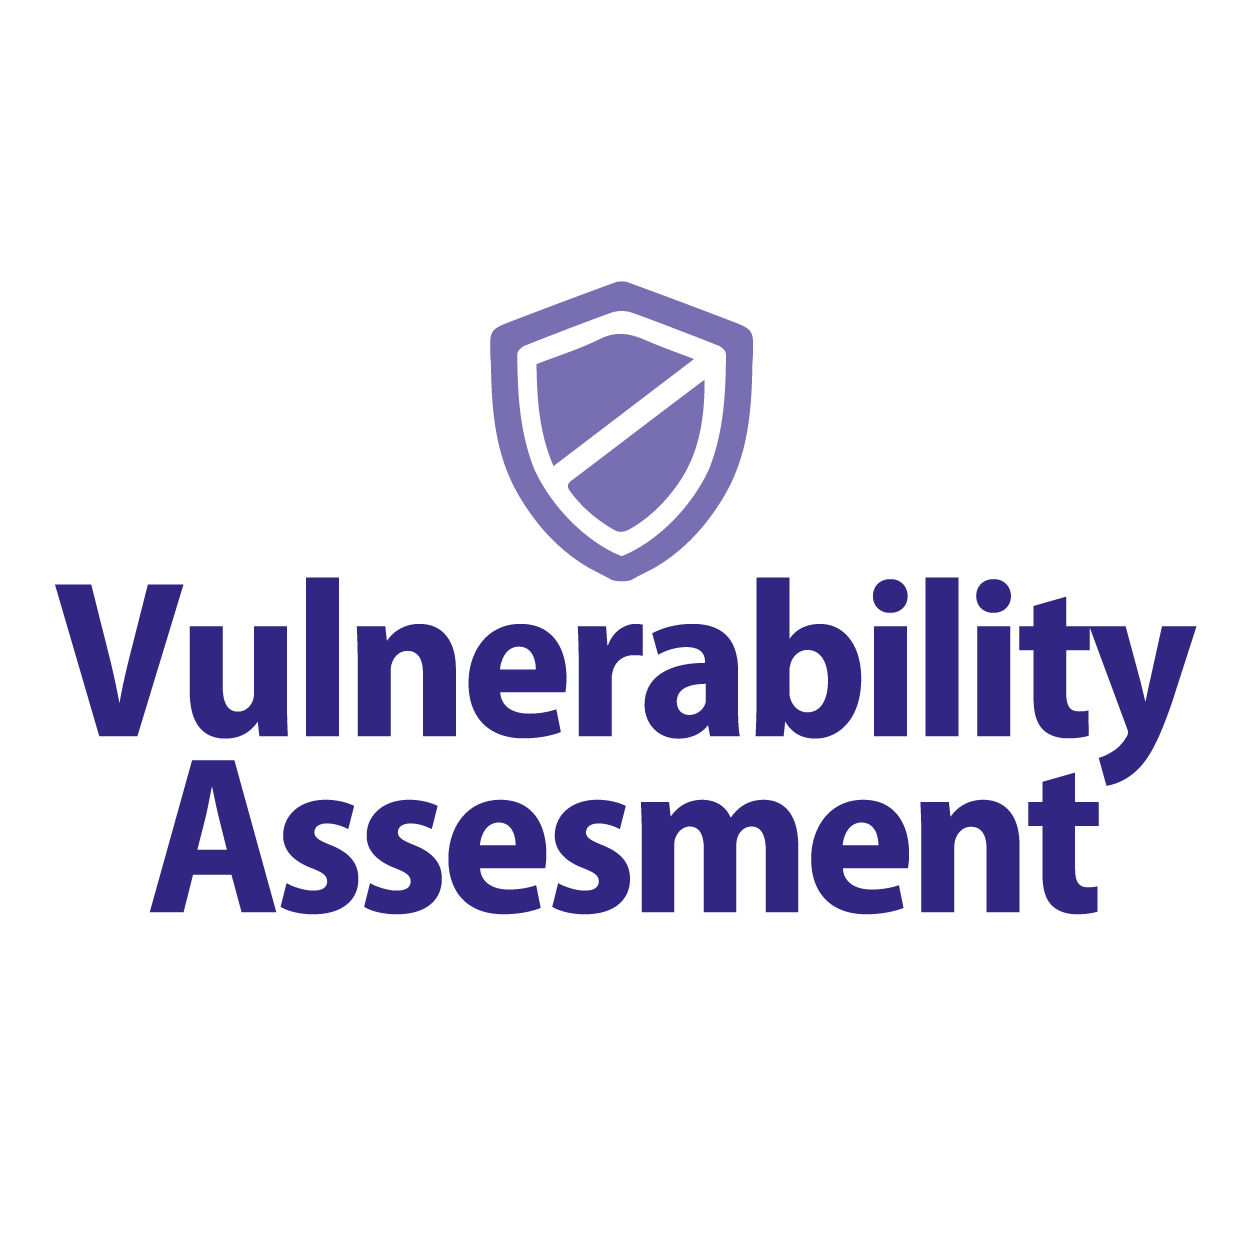 Cyber security vulnerability assessment